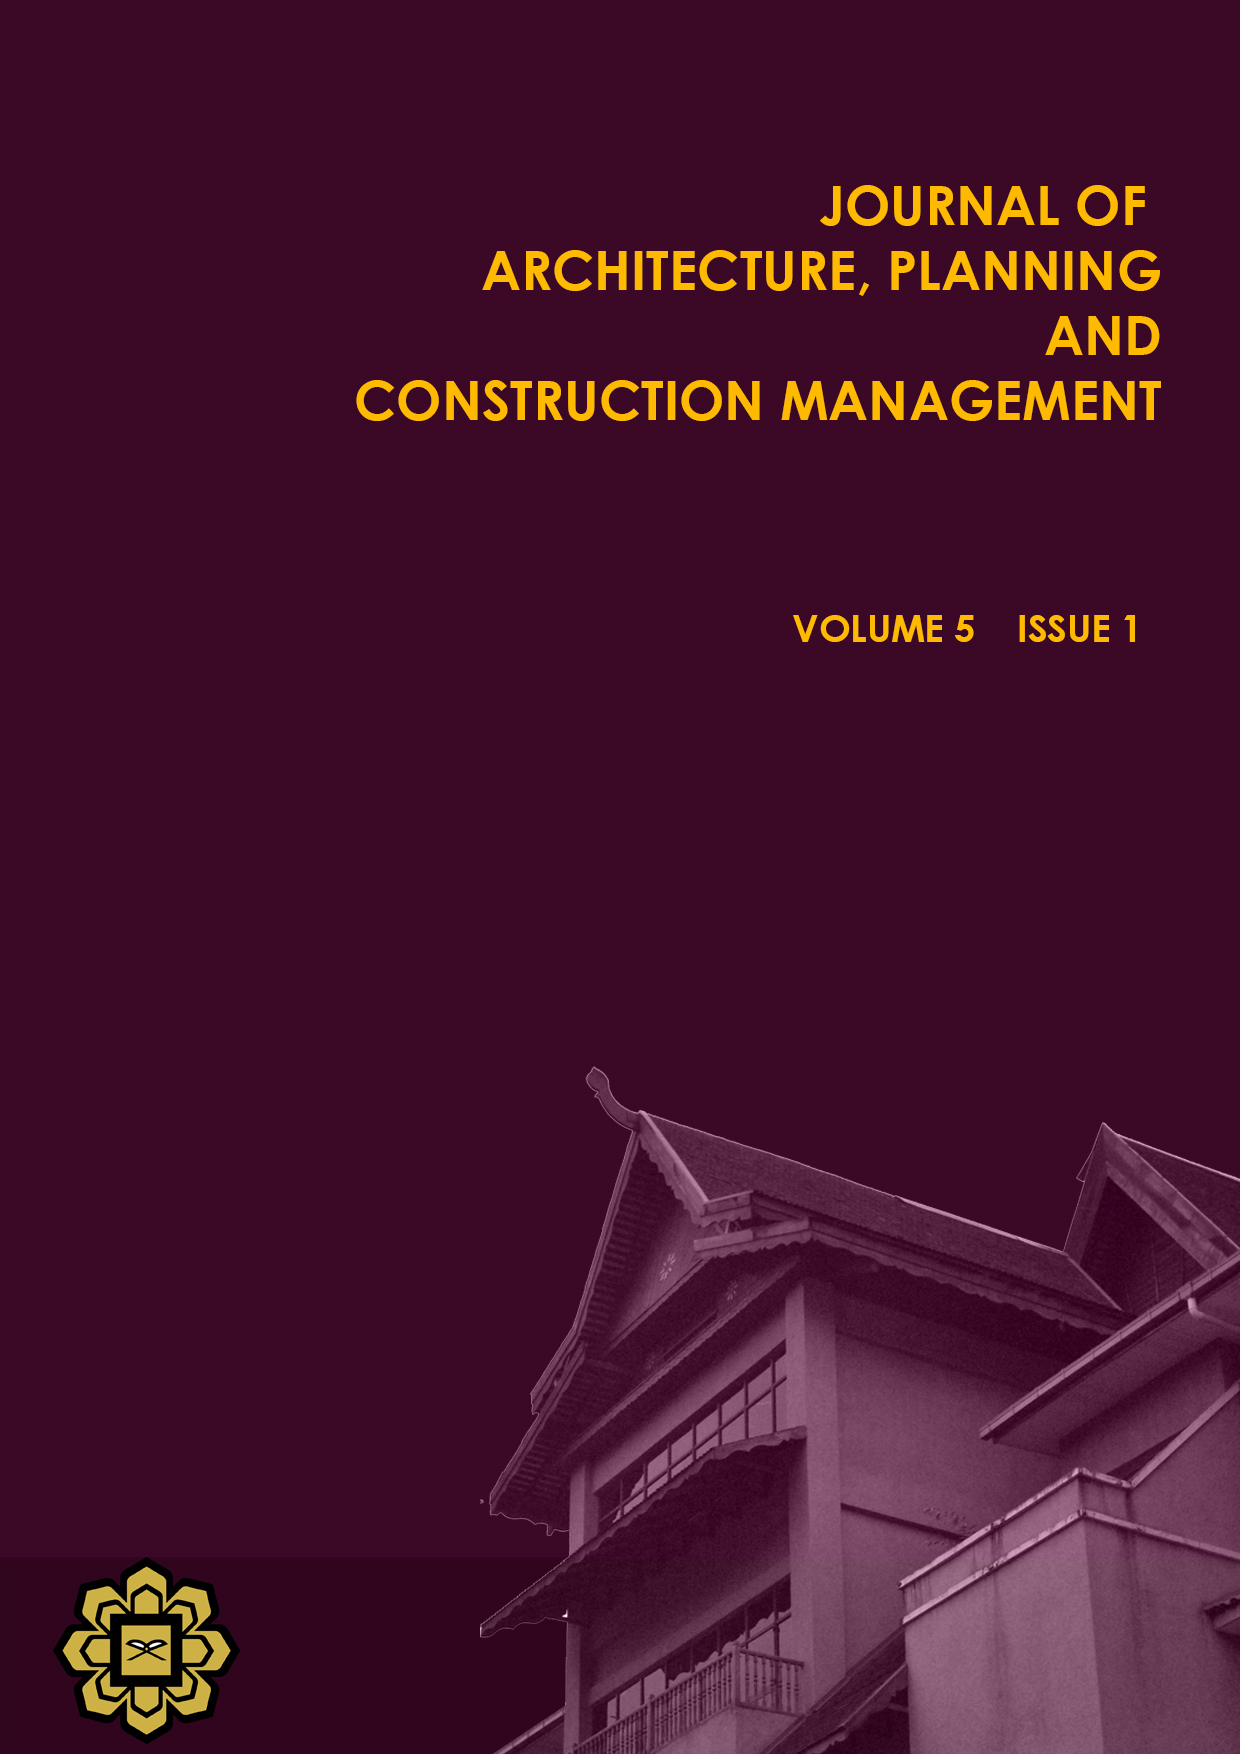 					View Vol. 6 No. 1 (2016): Journal of Architecture, Planning and Construction Management (JAPCM)
				